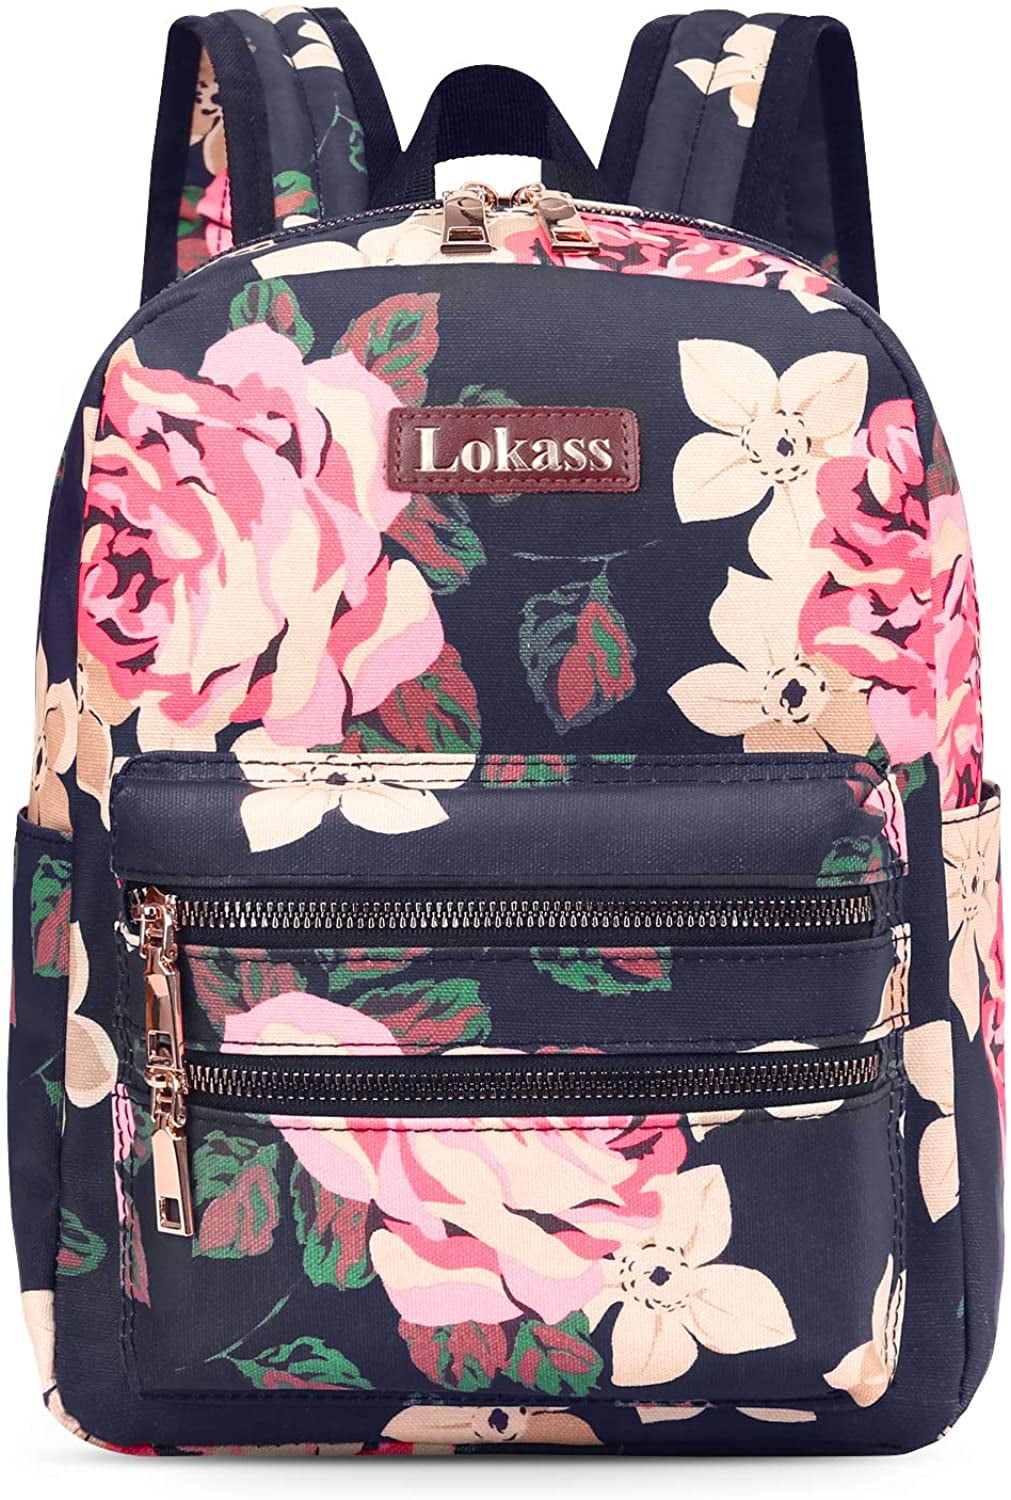 Backpack Colorful Paint Floral Plant Art Pink Print School Bags Boy Girl Daypack